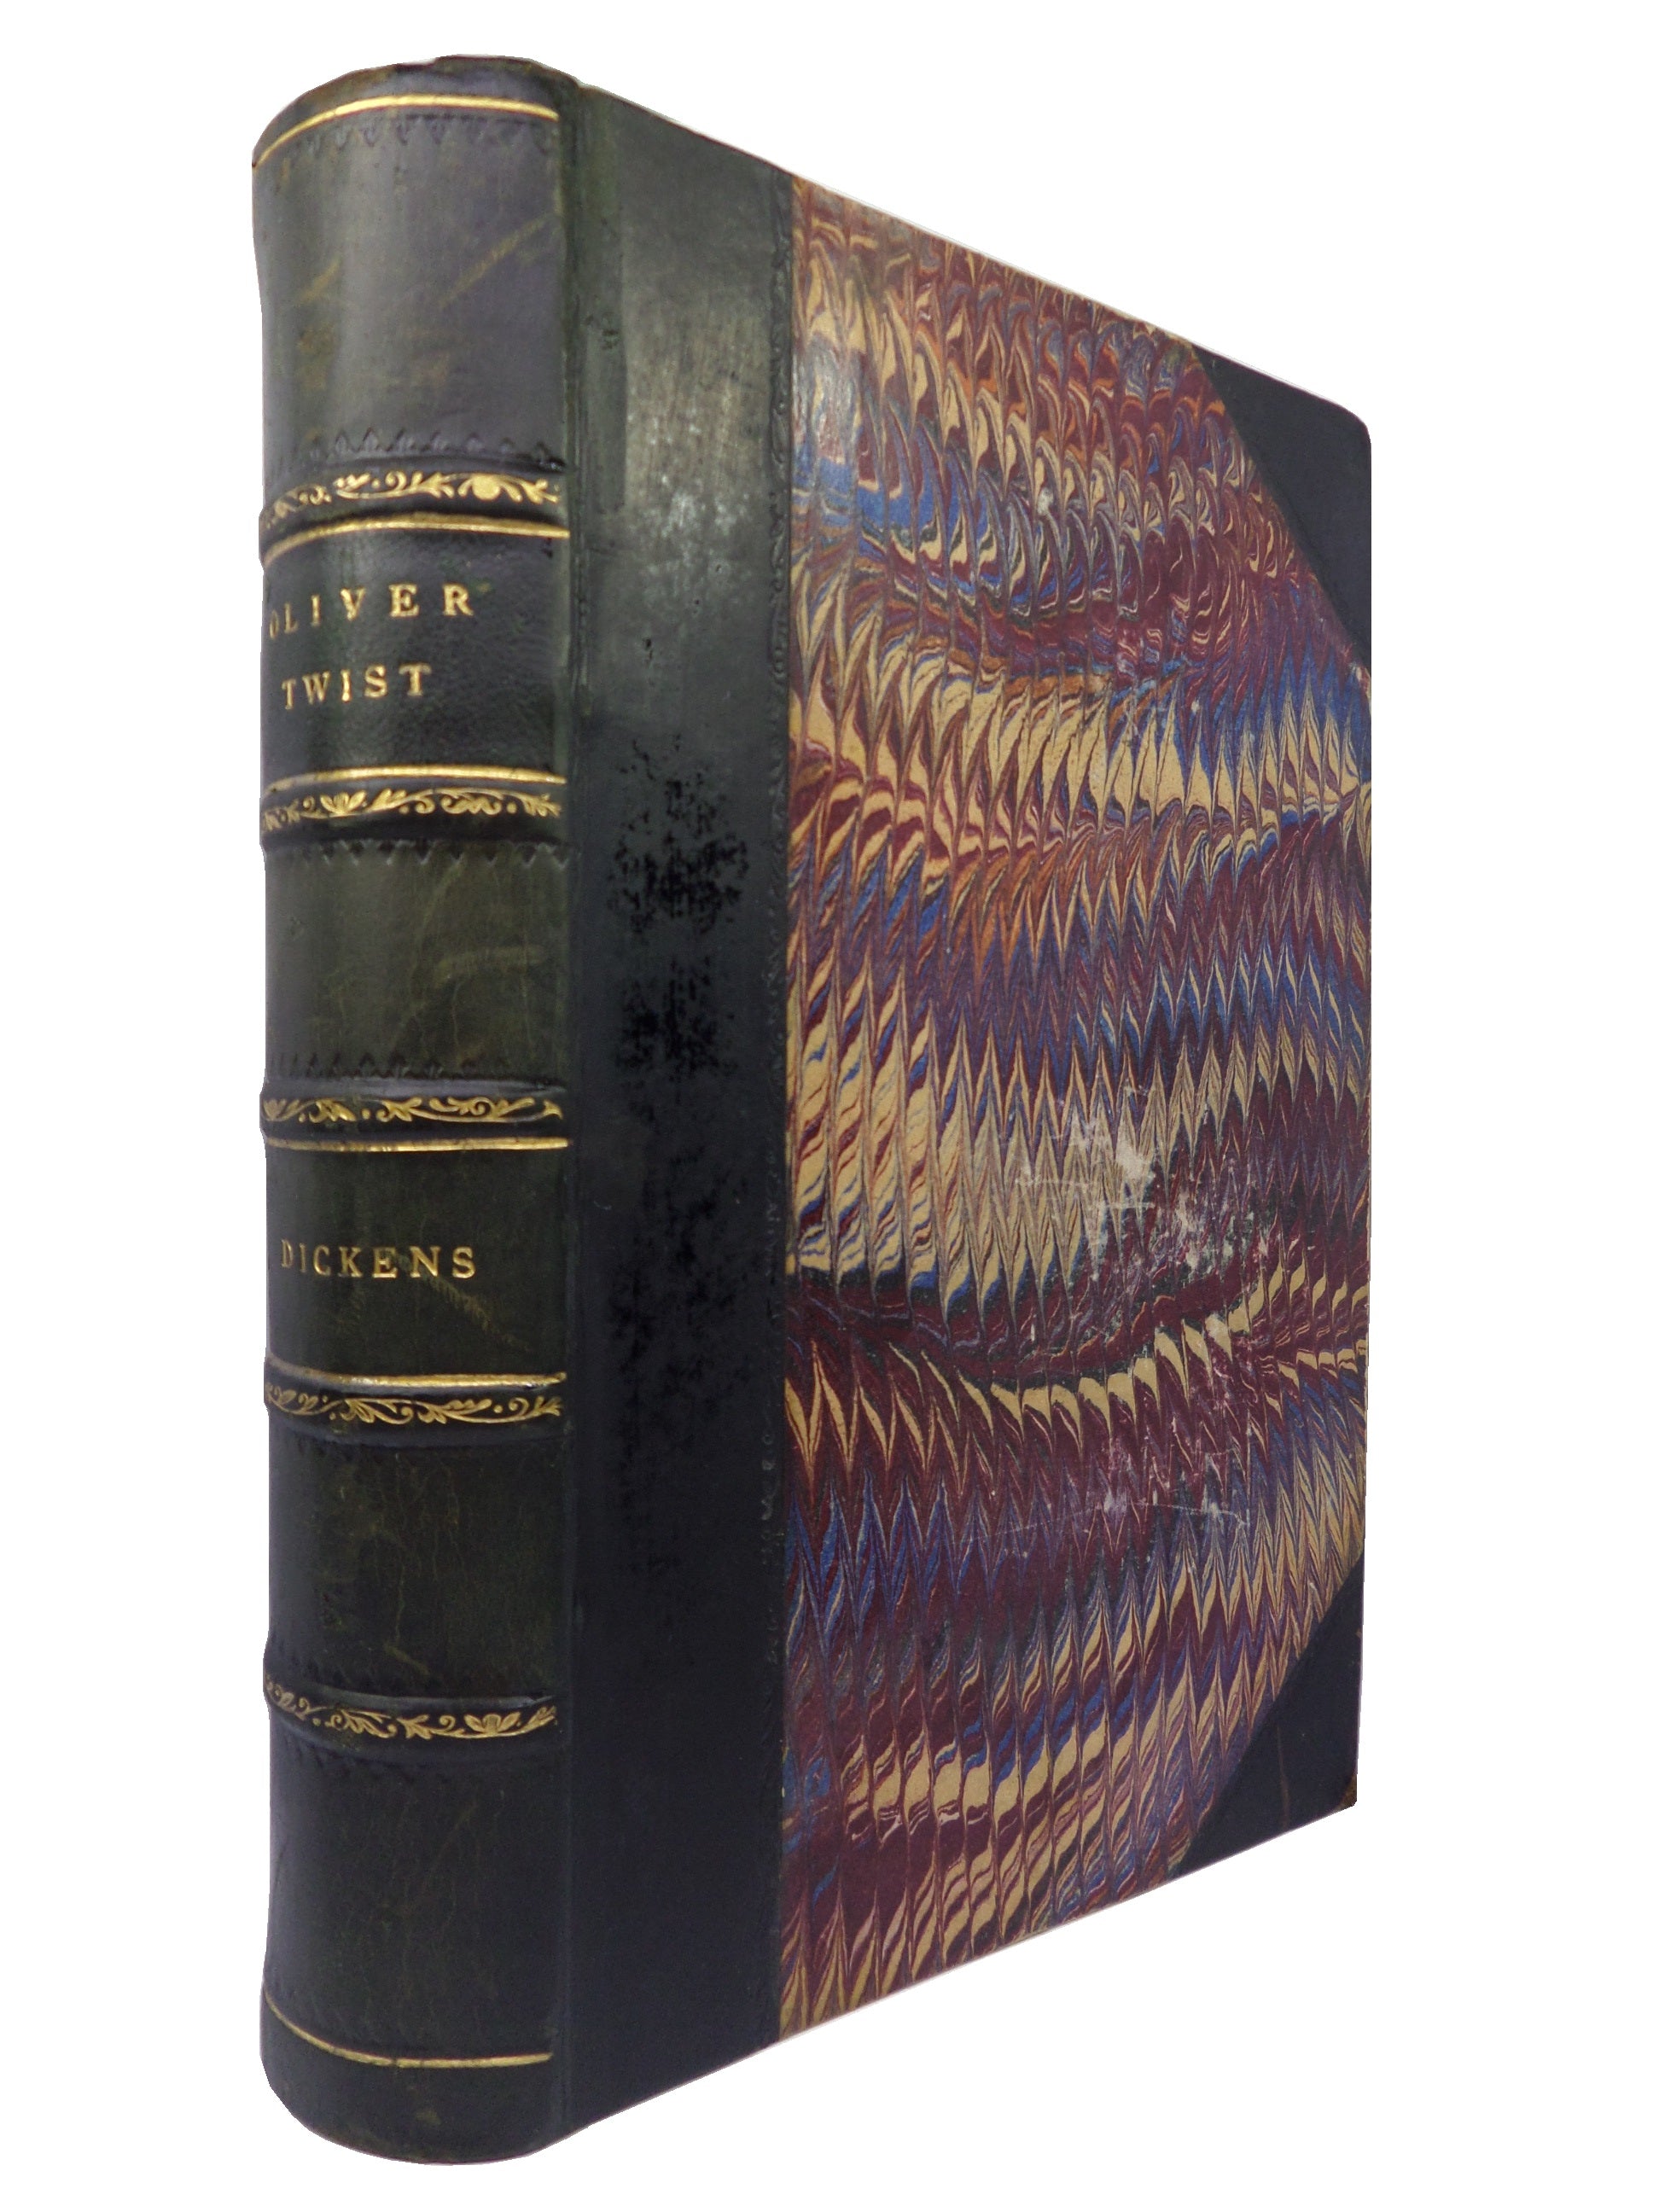 OLIVER TWIST BY CHARLES DICKENS 1874 LEATHER-BOUND